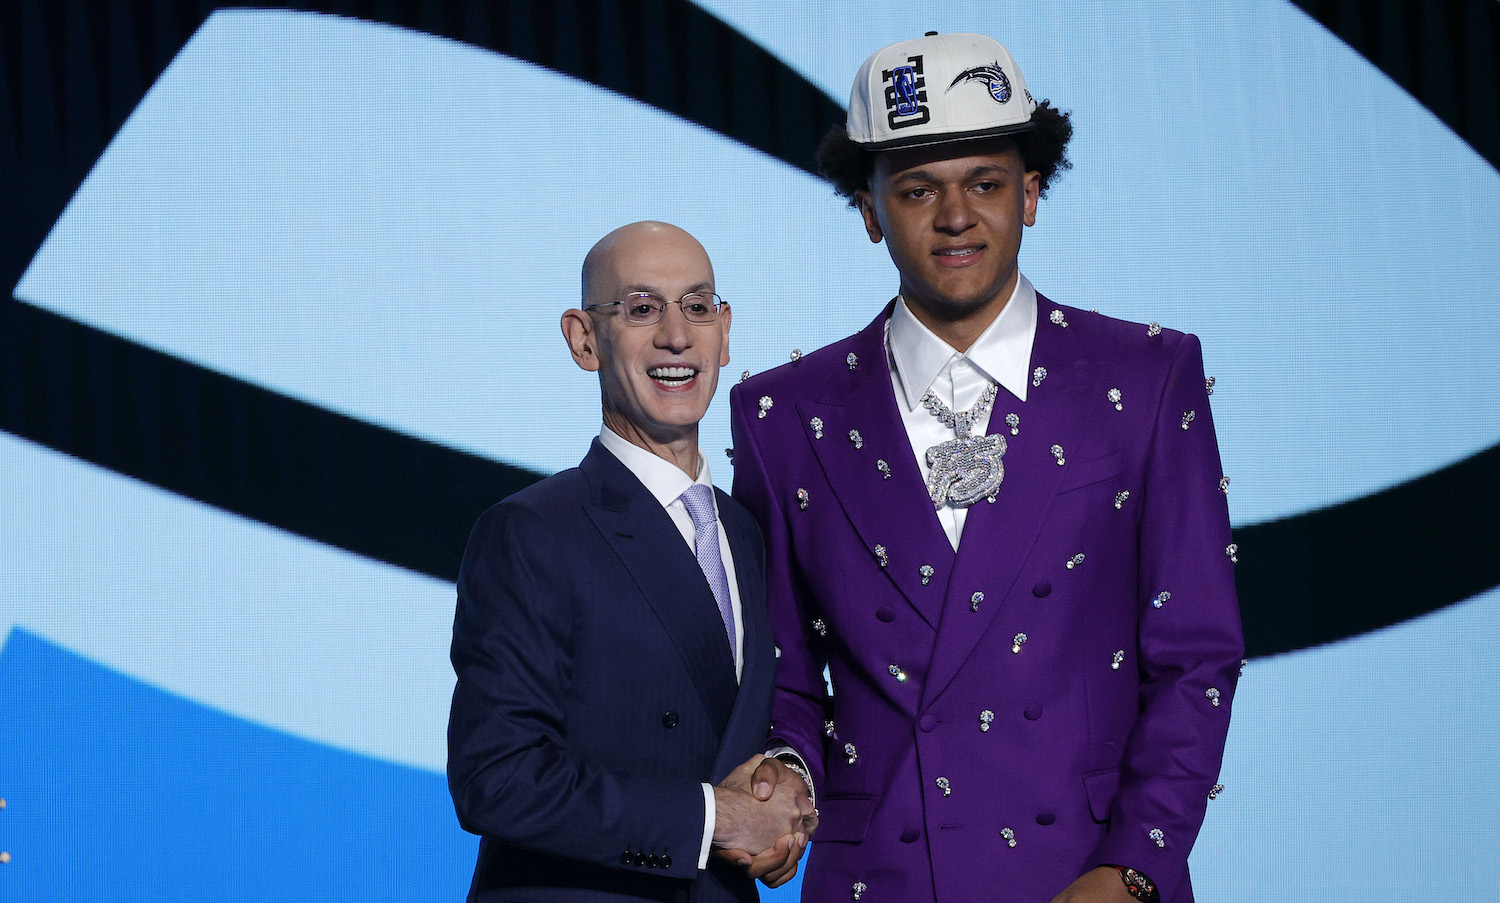 NEW YORK, NEW YORK - JUNE 23: NBA commissioner Adam Silver and Paolo Banchero pose for photos after Banchero was drafted with the 1st overall pick by the Orlando Magic during the 2022 NBA Draft at Barclays Center on June 23, 2022 in New York City. NOTE TO USER: User expressly acknowledges and agrees that, by downloading and or using this photograph, User is consenting to the terms and conditions of the Getty Images License Agreement. (Photo by Sarah Stier/Getty Images)